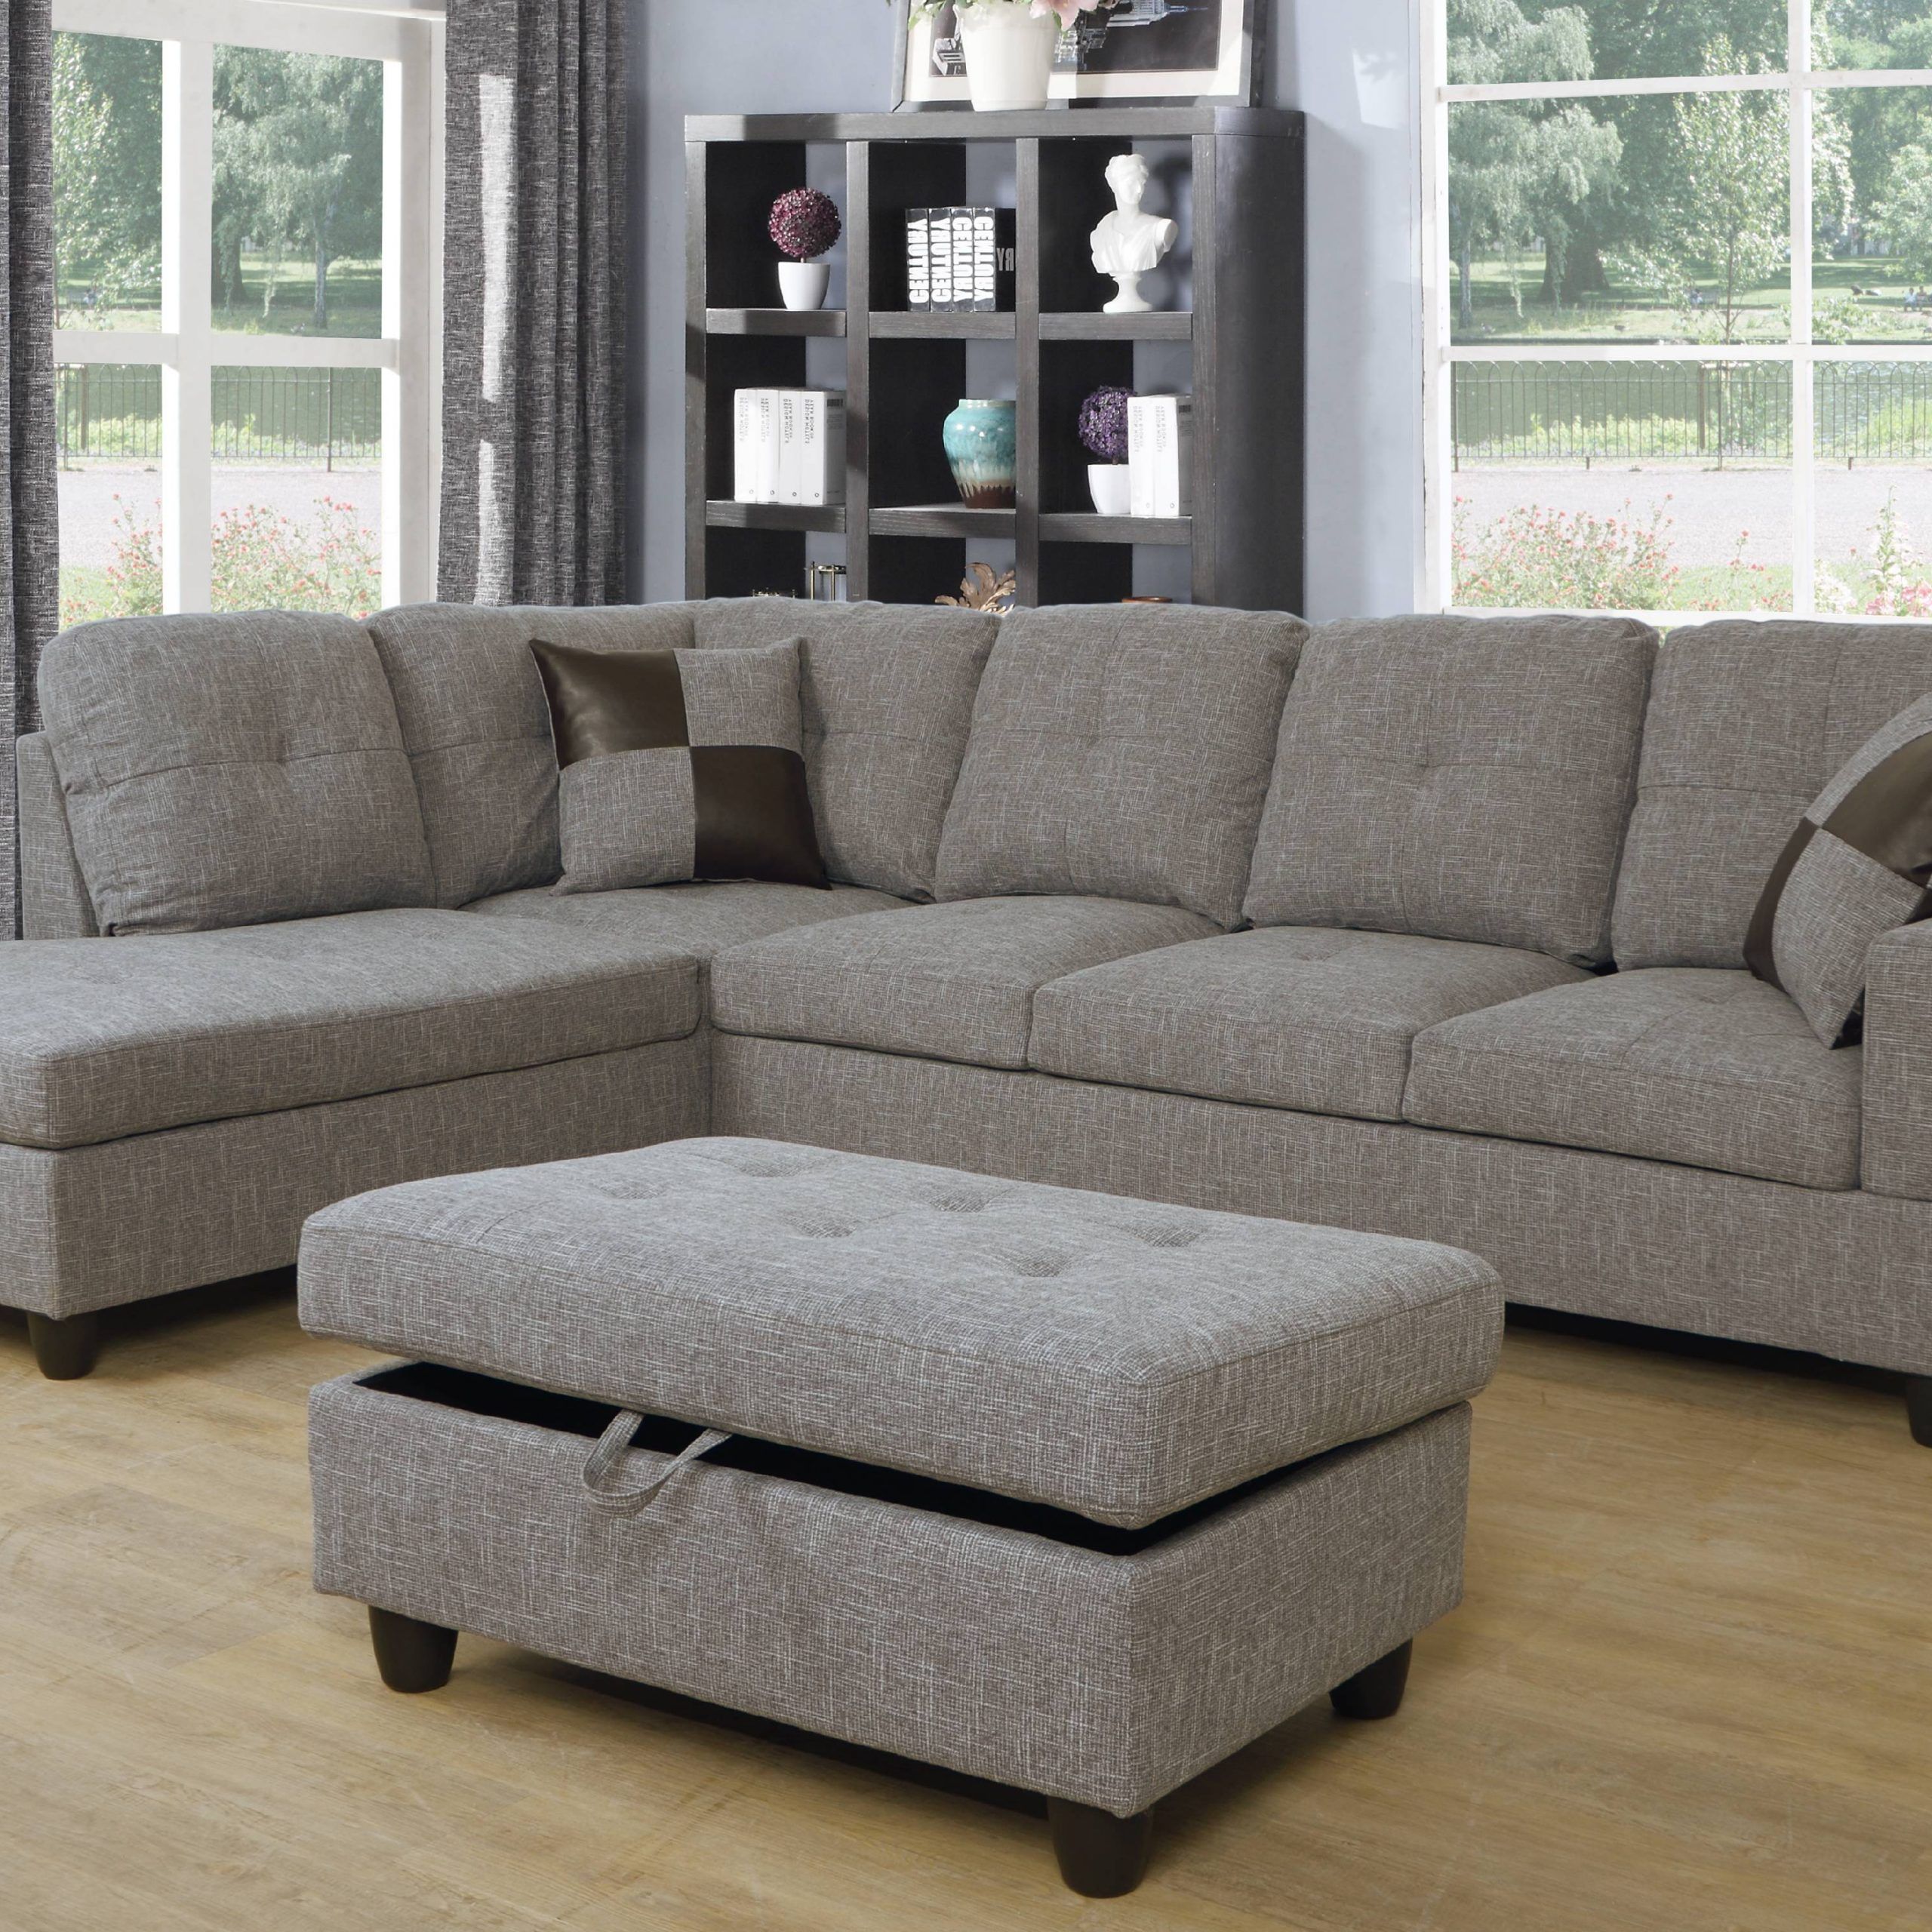 Ponliving Furniture L Shape Sectional Sofa Set With Storage Ottoman Throughout Rustic Brown Sectional Corner Desks (View 2 of 15)